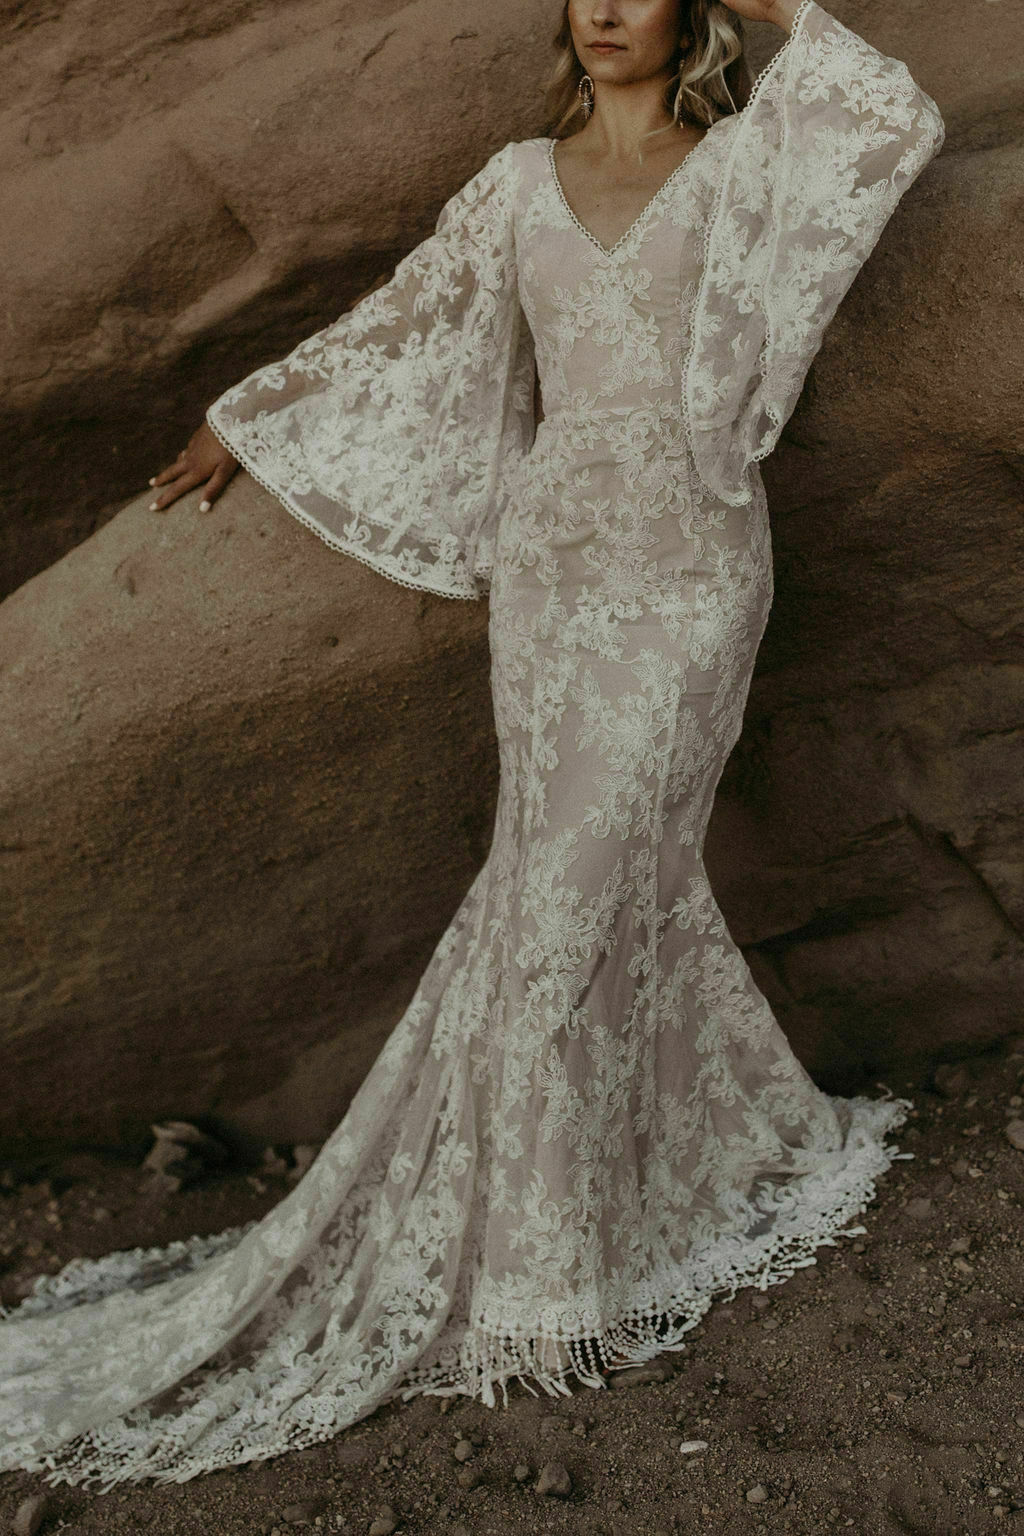 Back of cream and lace wedding dress showing the corset back and